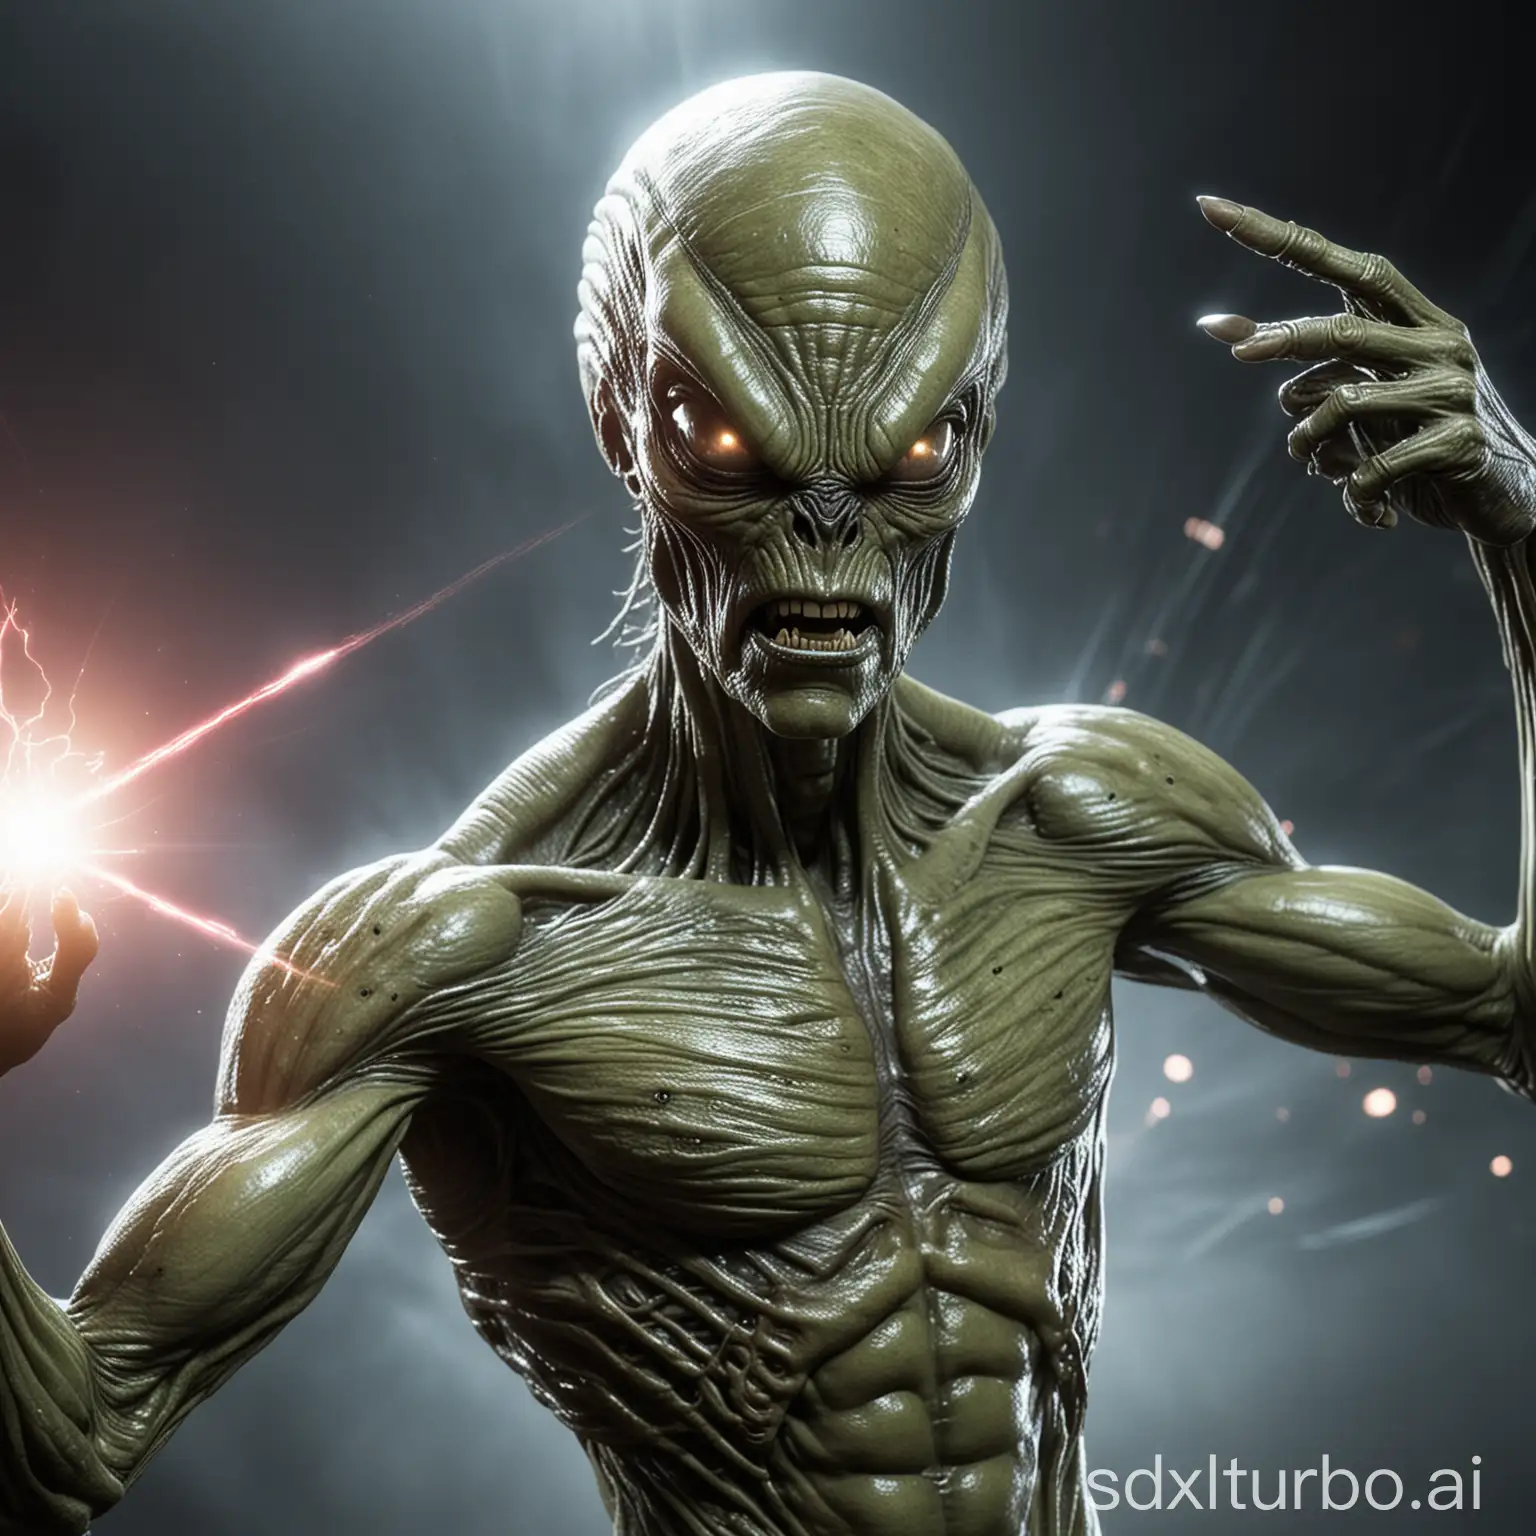 A true release alien with angry face show an arm with lasers